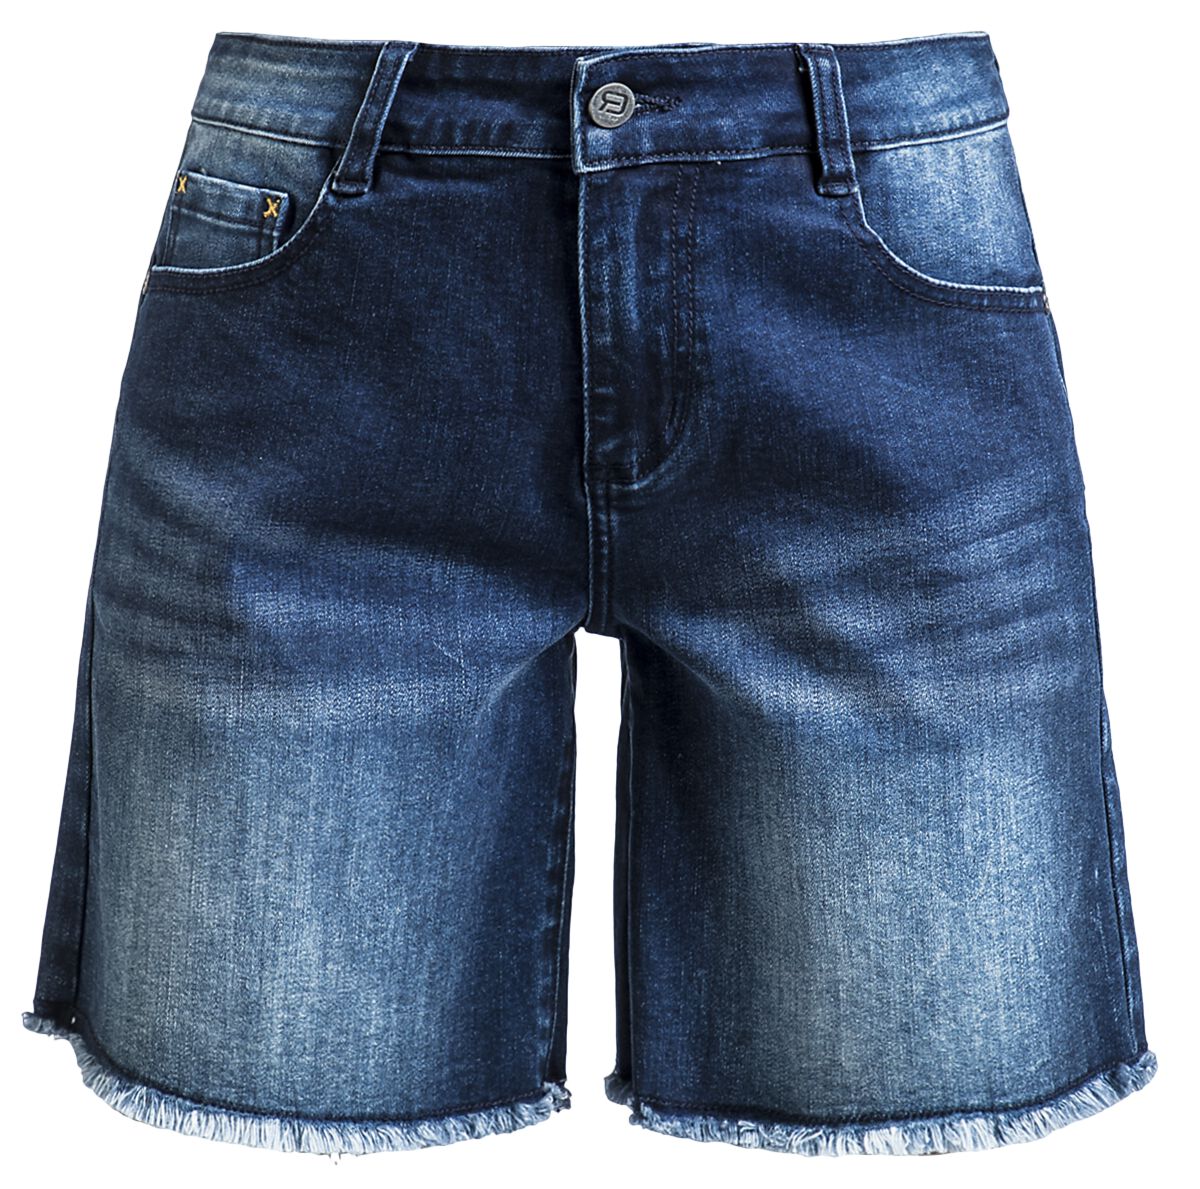 Image of Shorts di RED by EMP - Denim shorts with distressed detailing - 27 a 31 - Donna - blu scuro